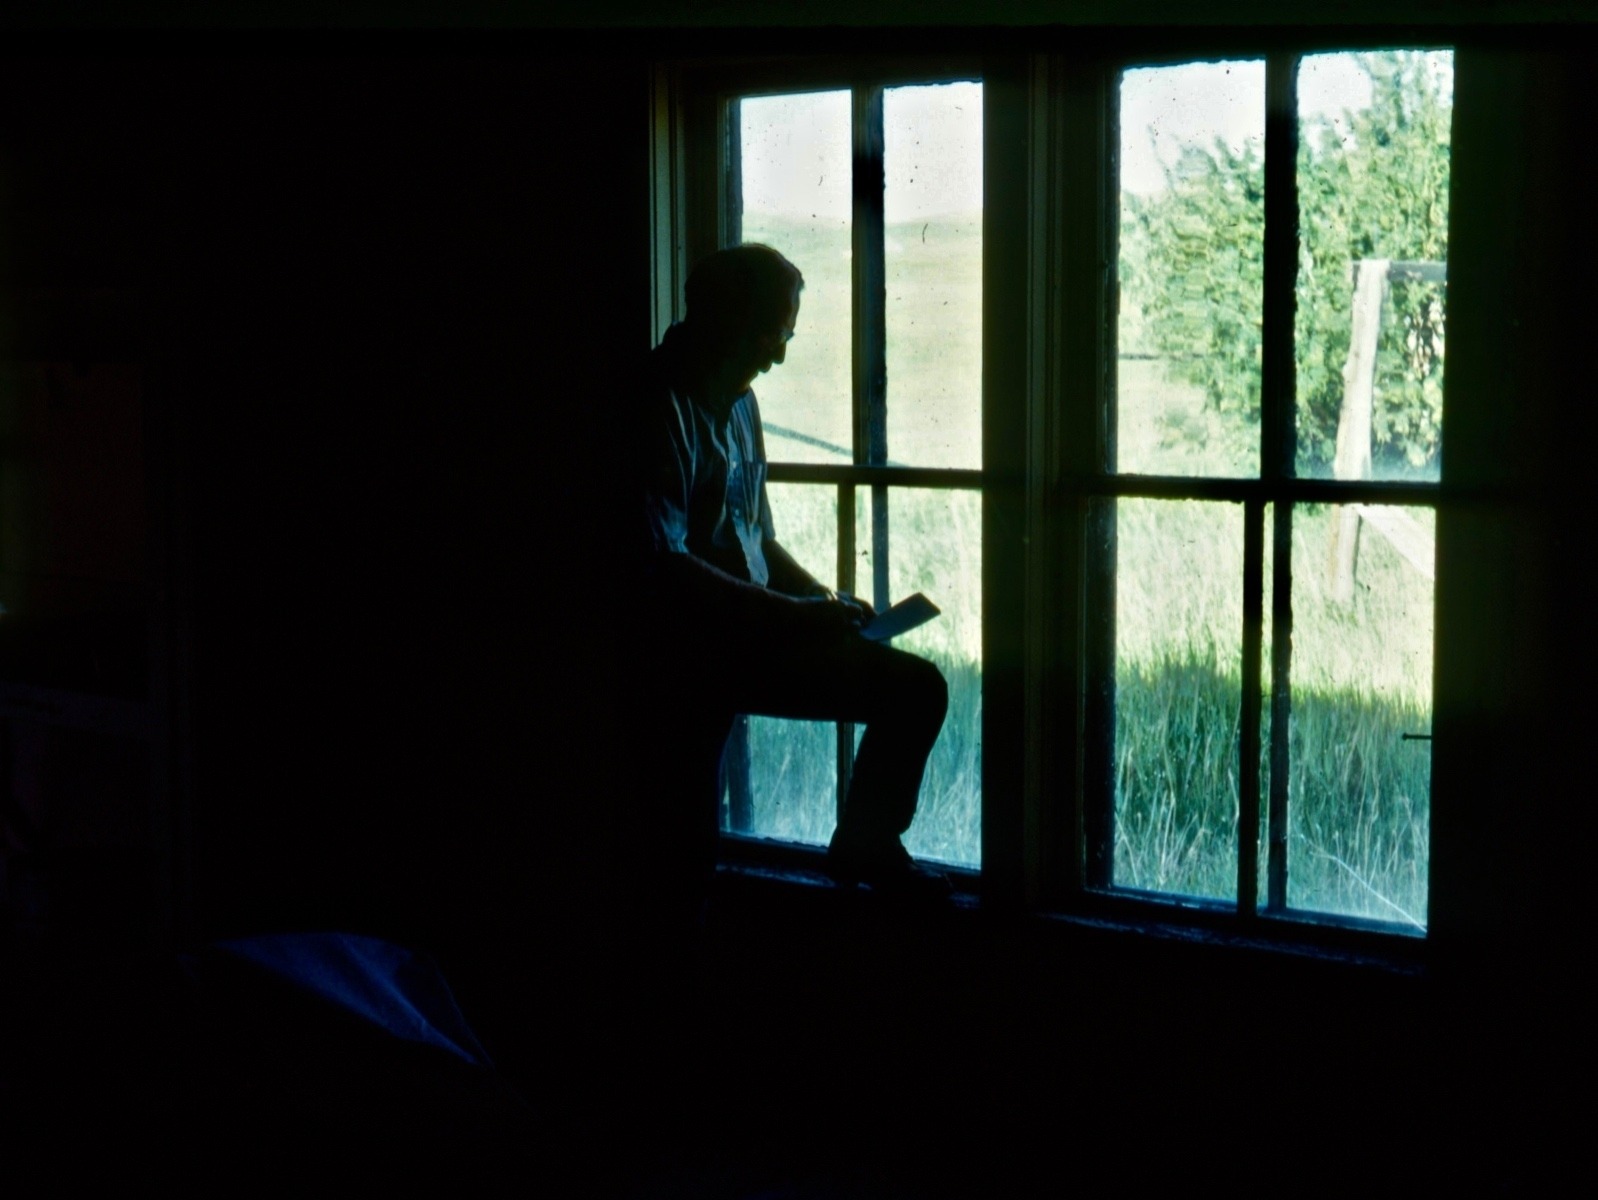 Doig, when in his prime, trying to instill the lessons of history into his work. Here he absorbs the vibe in an abandoned farm house where heart-felt dreams rose, fell part like a heartache and drifted away. Photo by Carol Doig, courtesy MSU Library Doig Archives 